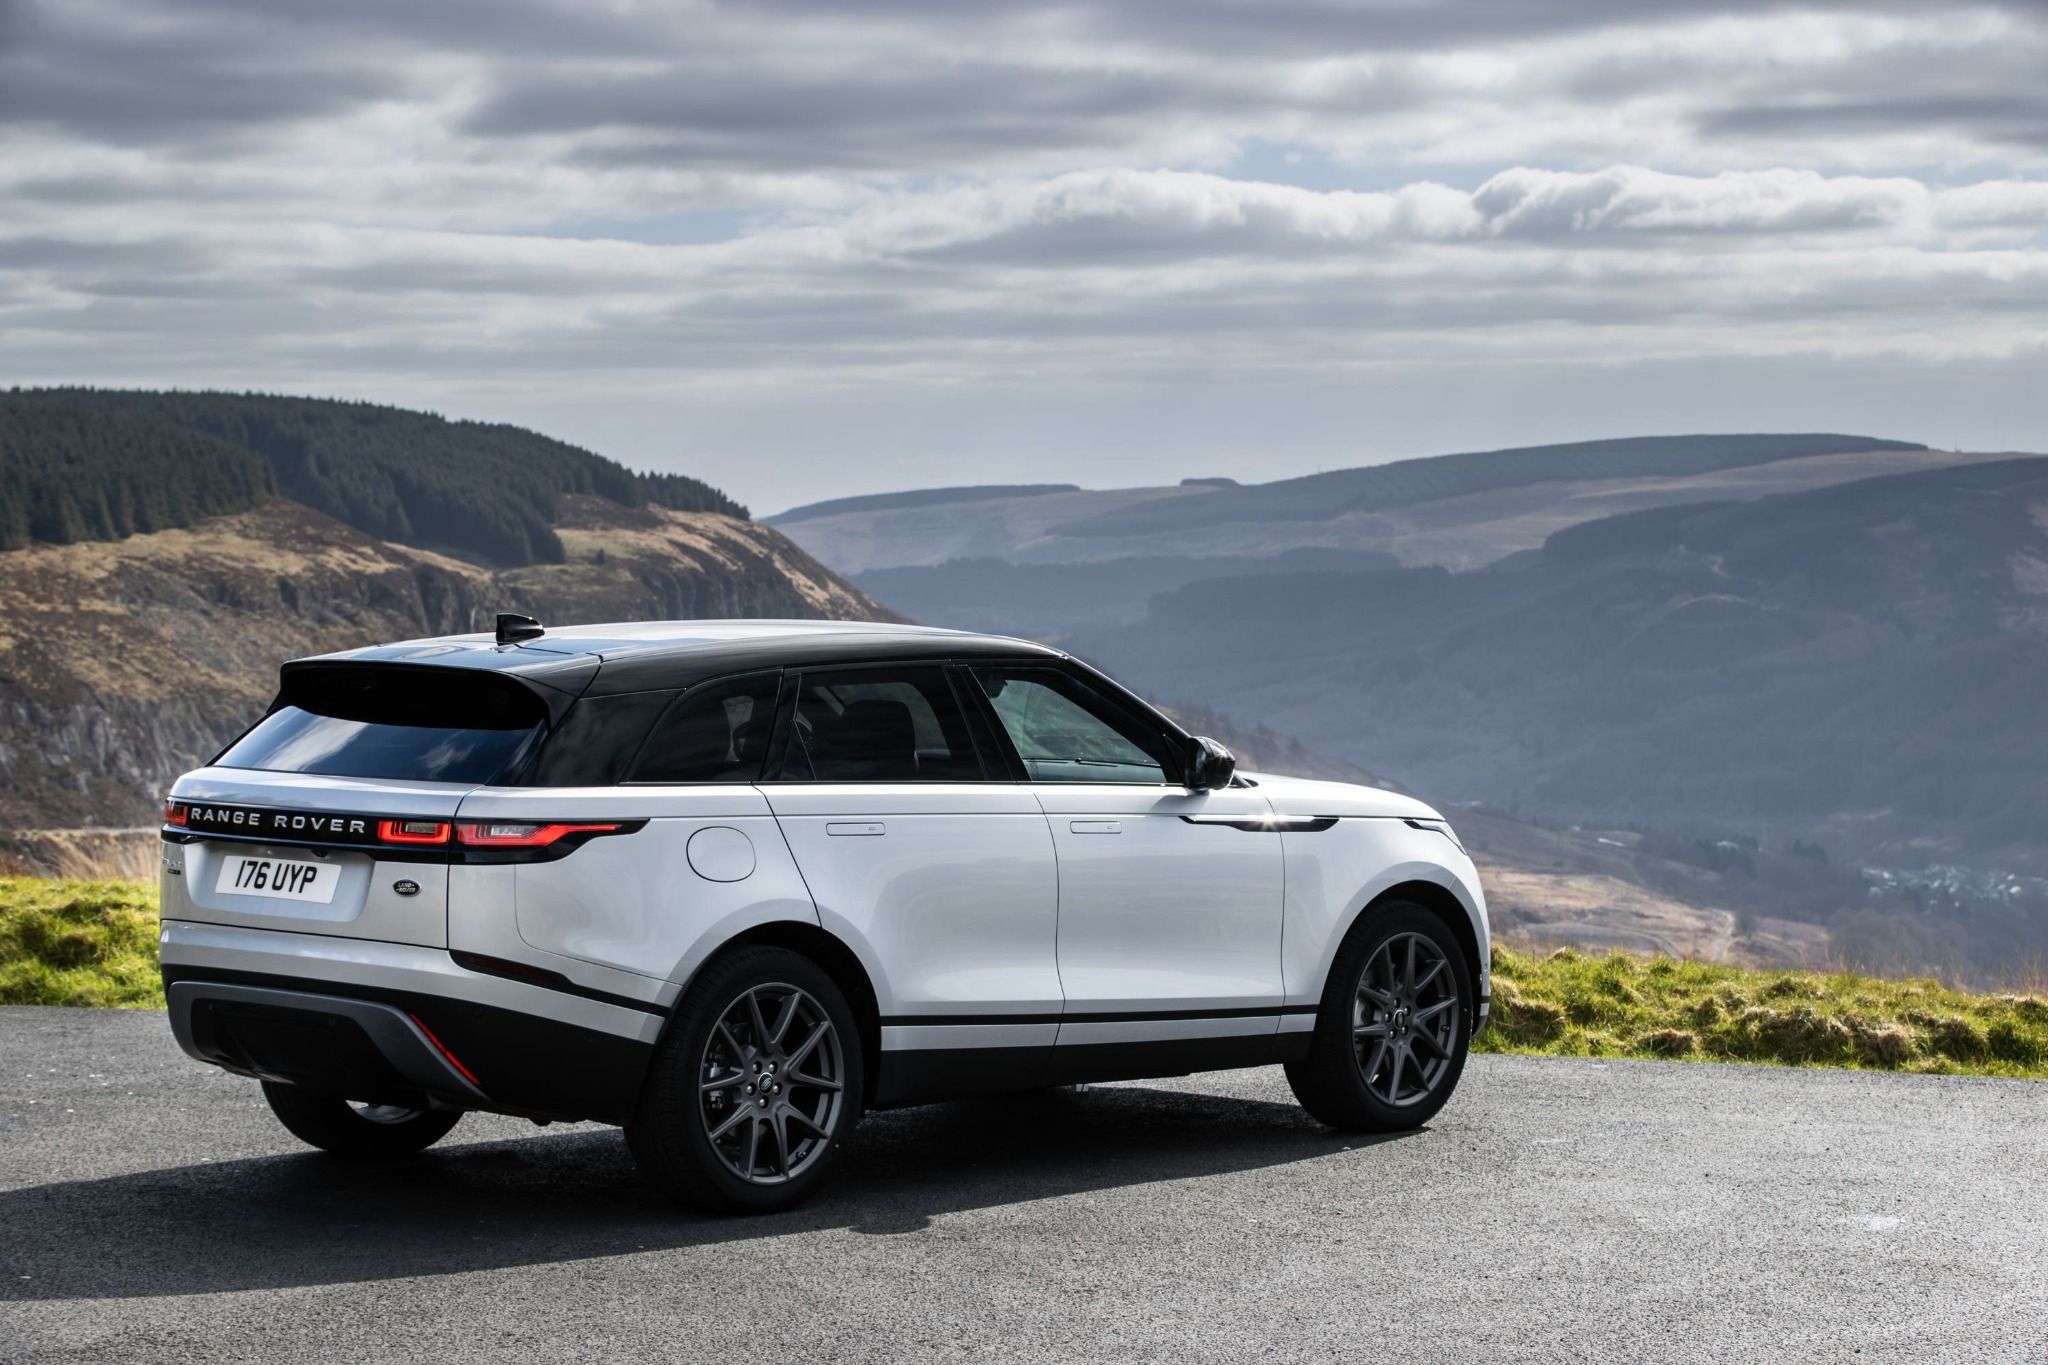 Land Rover reliability rating, according to consumer reports